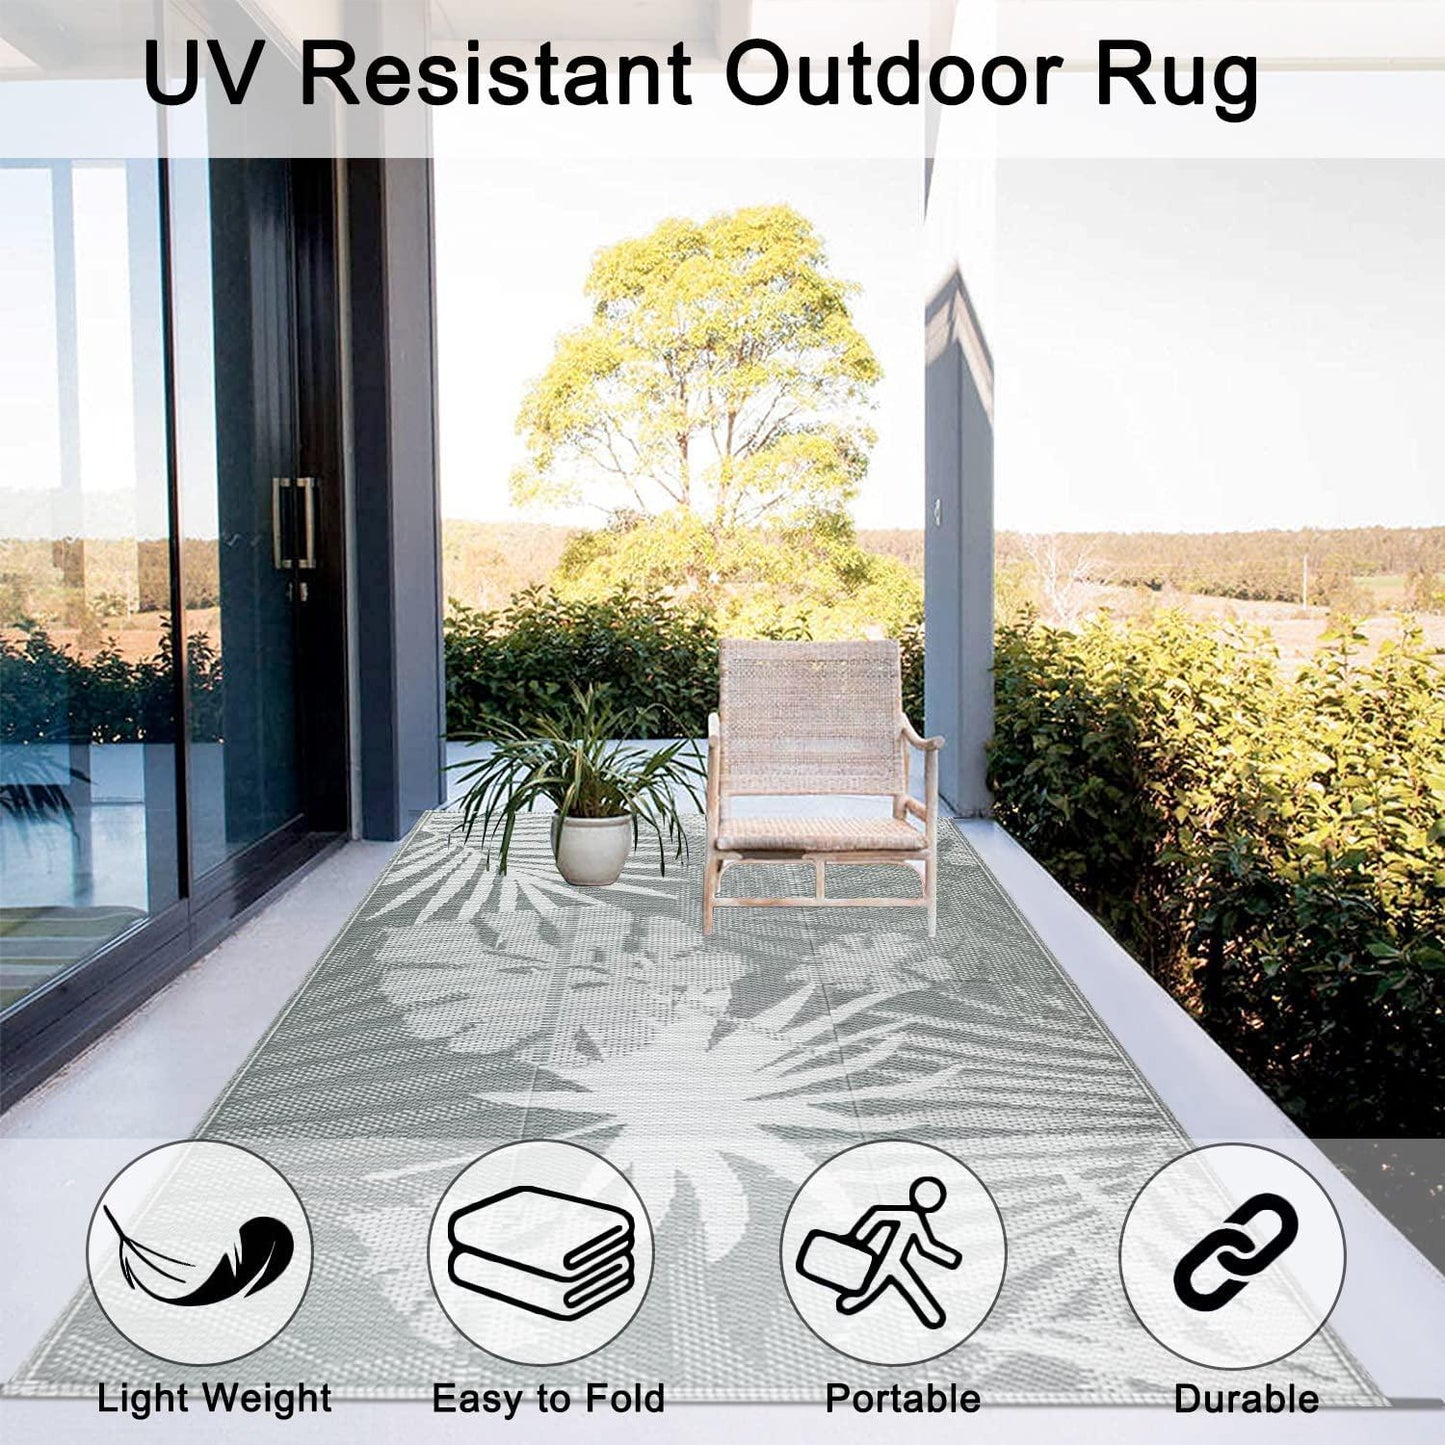 Outdoor Rugs 5 x8 Waterproo Patio Rugs Outdoor Clearance Reversible Lightweight Outdoor Rugs Portable RV Camping Mats for Tents Deck Porch BBQ Beach Backyard